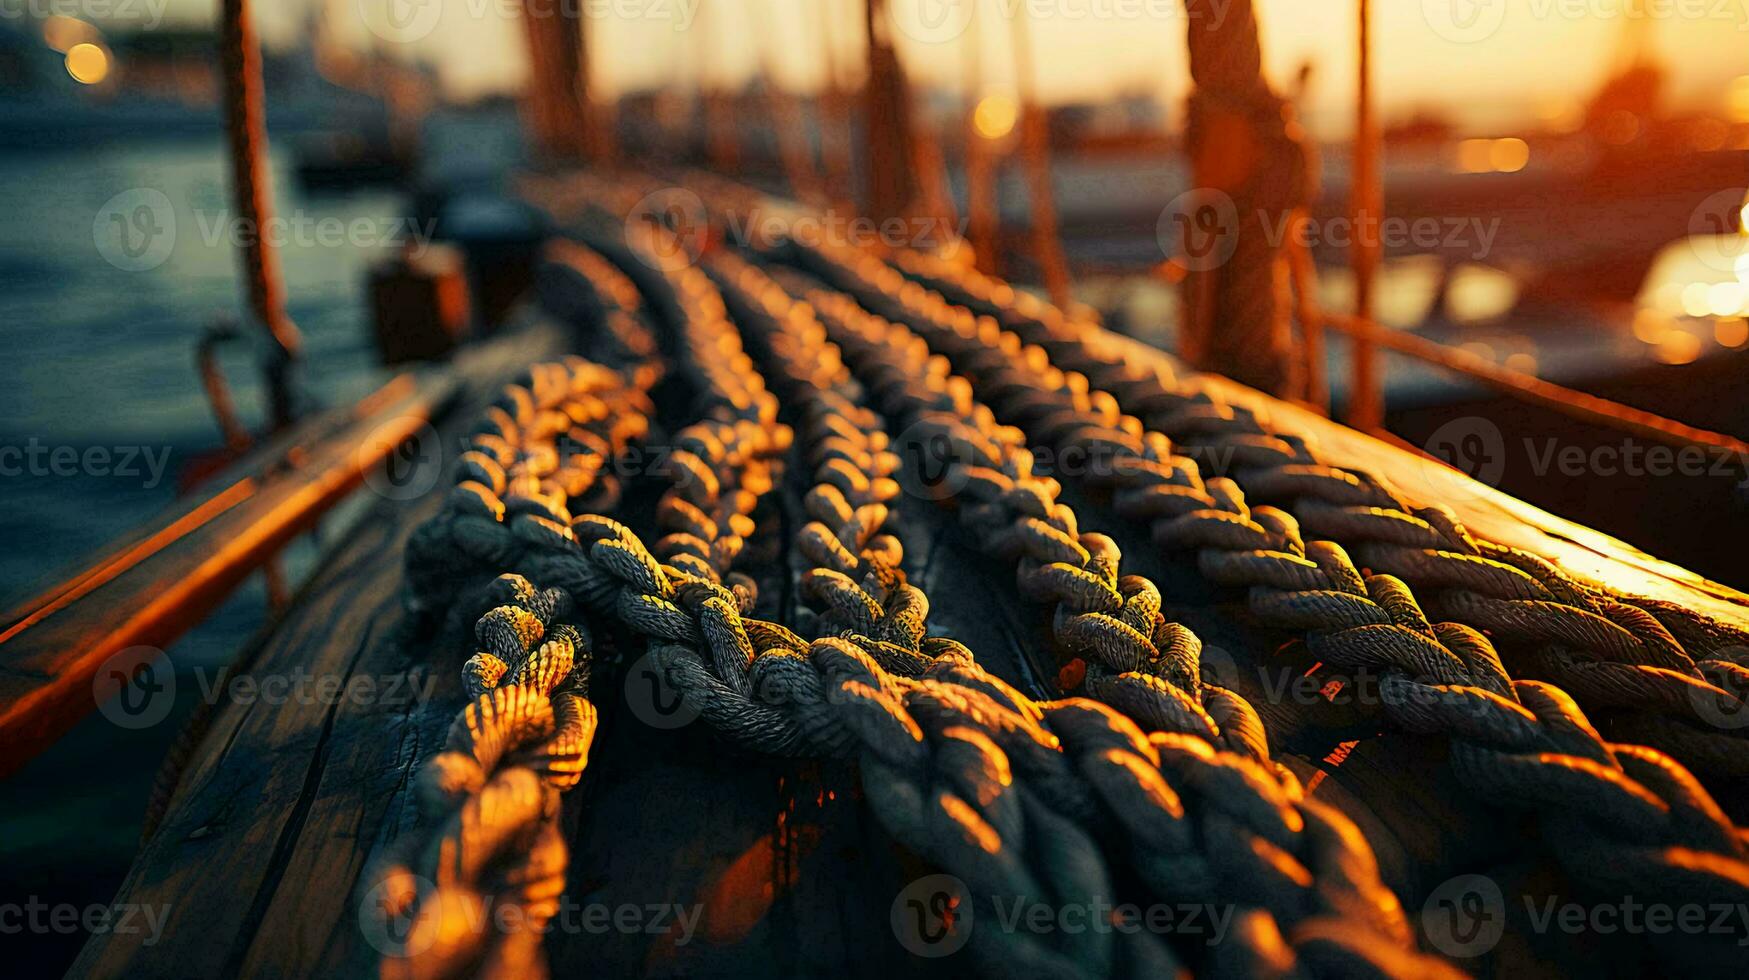 Large thick strong marine ropes for ships lie on a wooden pier 28274908  Stock Photo at Vecteezy